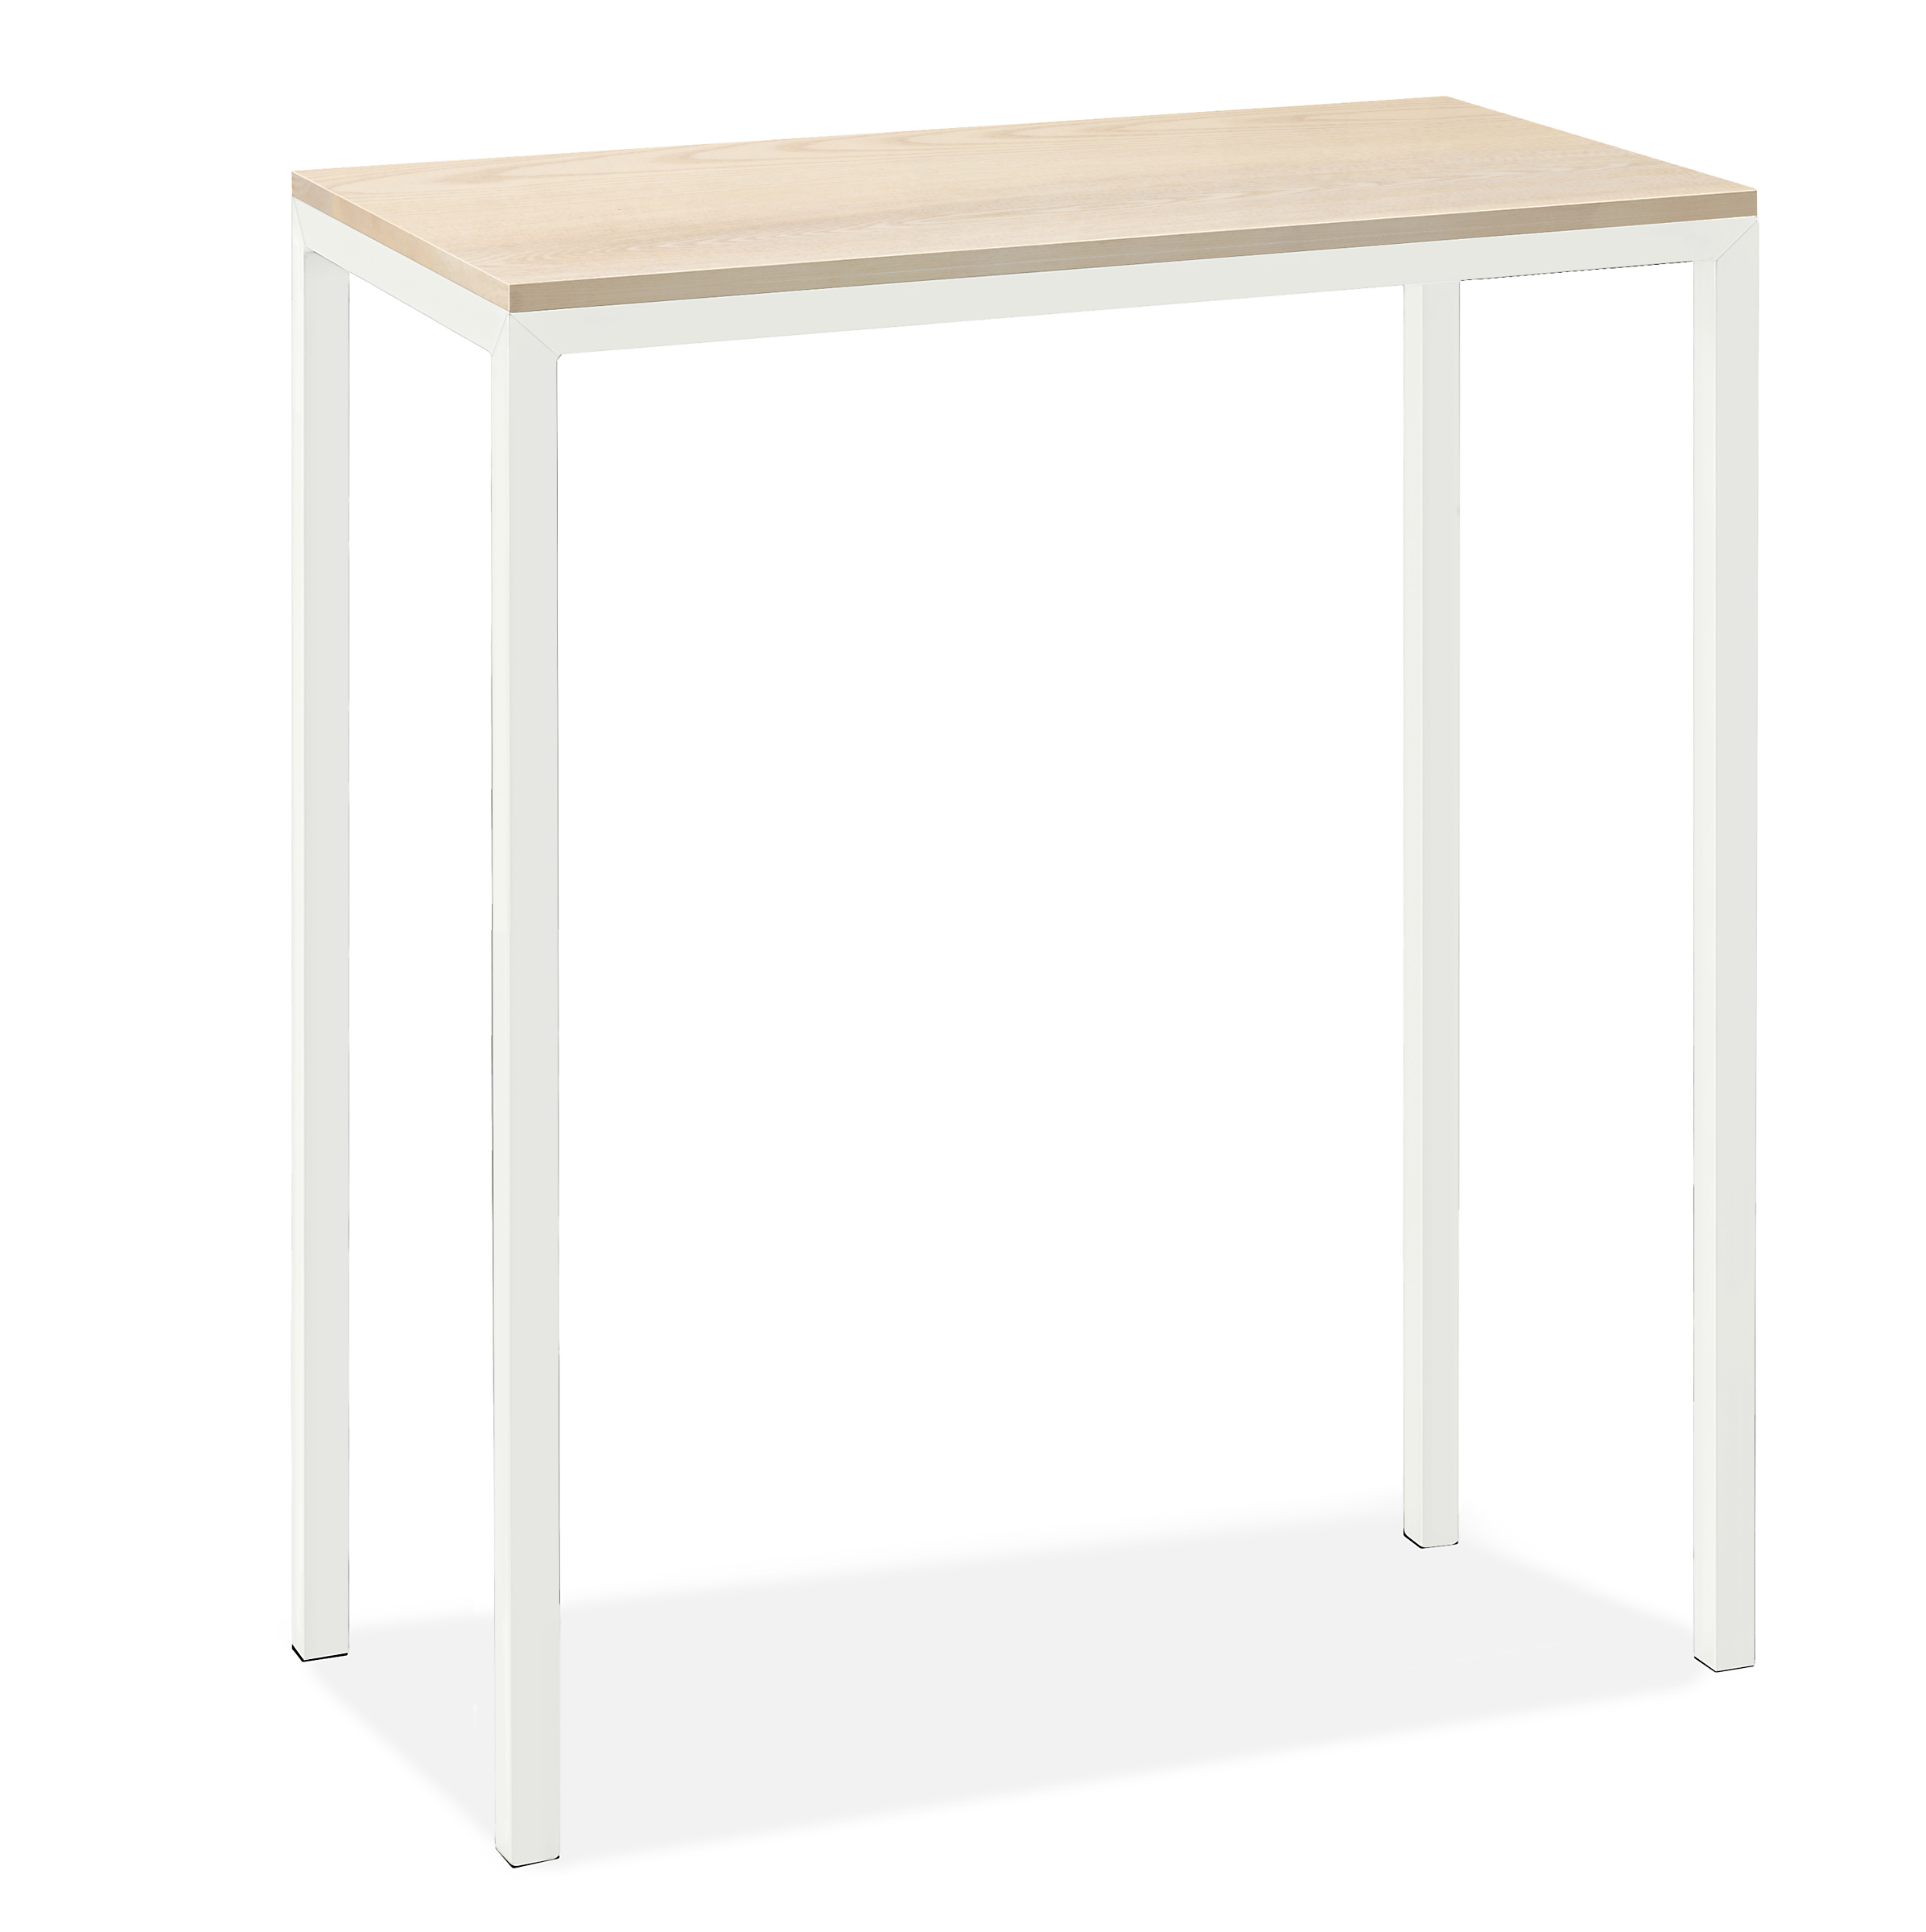 Parsons 48w 24d 42h Bar Table with 1.5" Leg